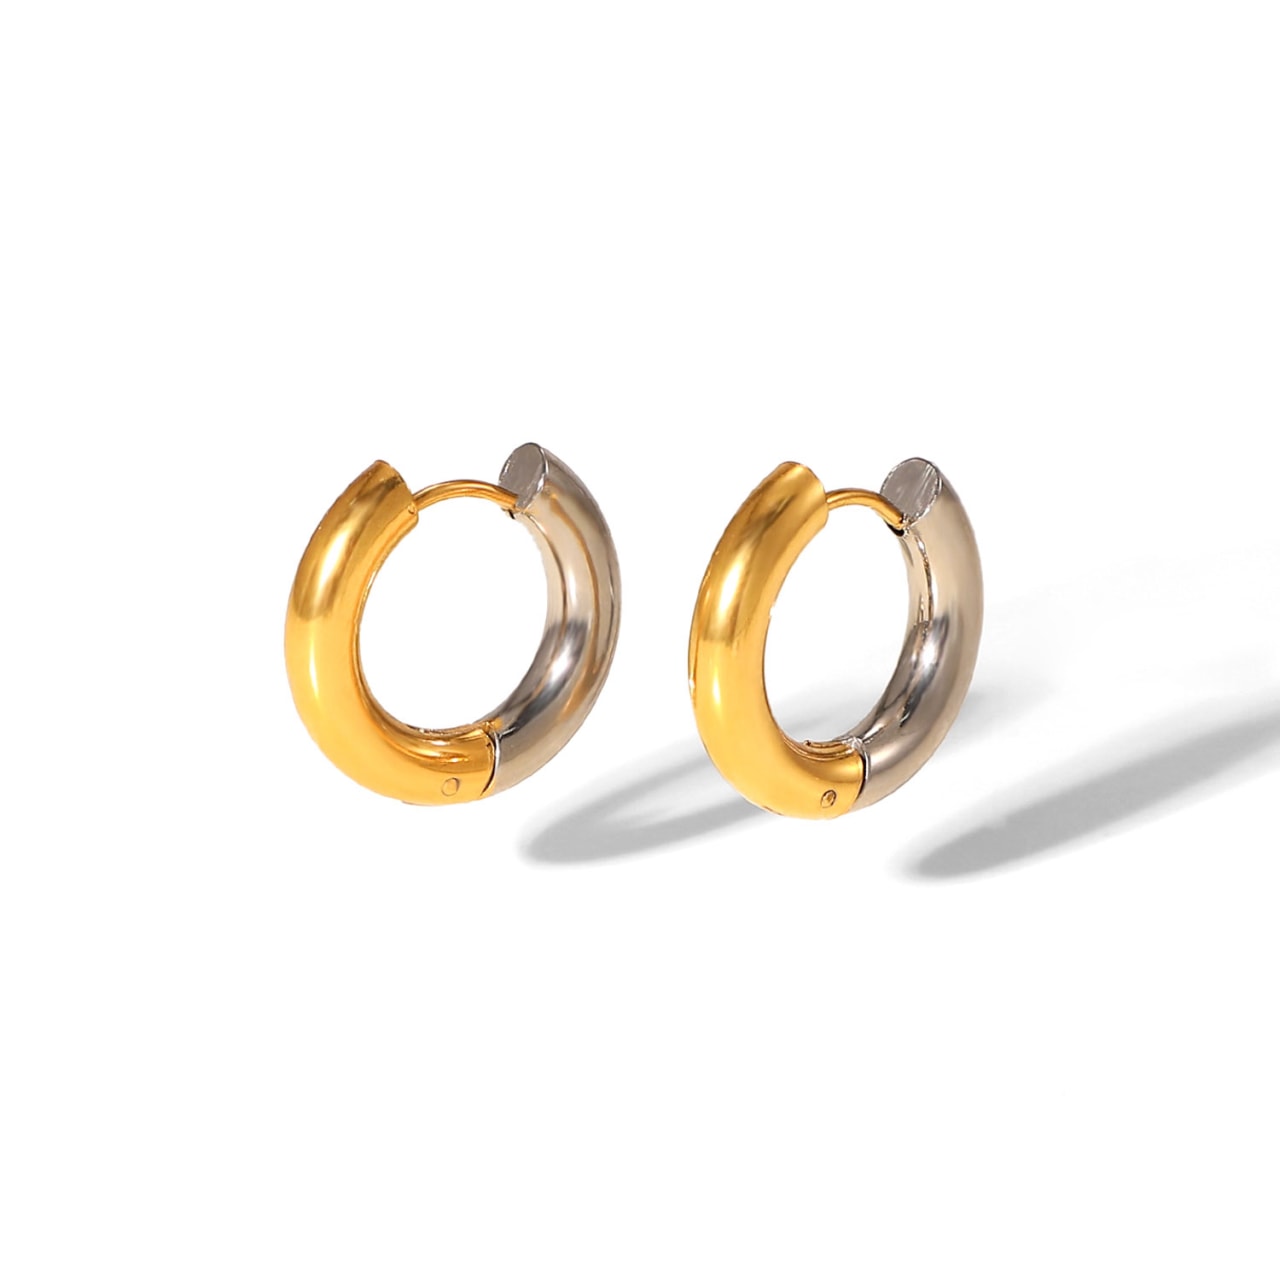 Minimalist Gold and Silver Dual-tone Circle-shaped 18k Gold-plated Earrings - RYLAN